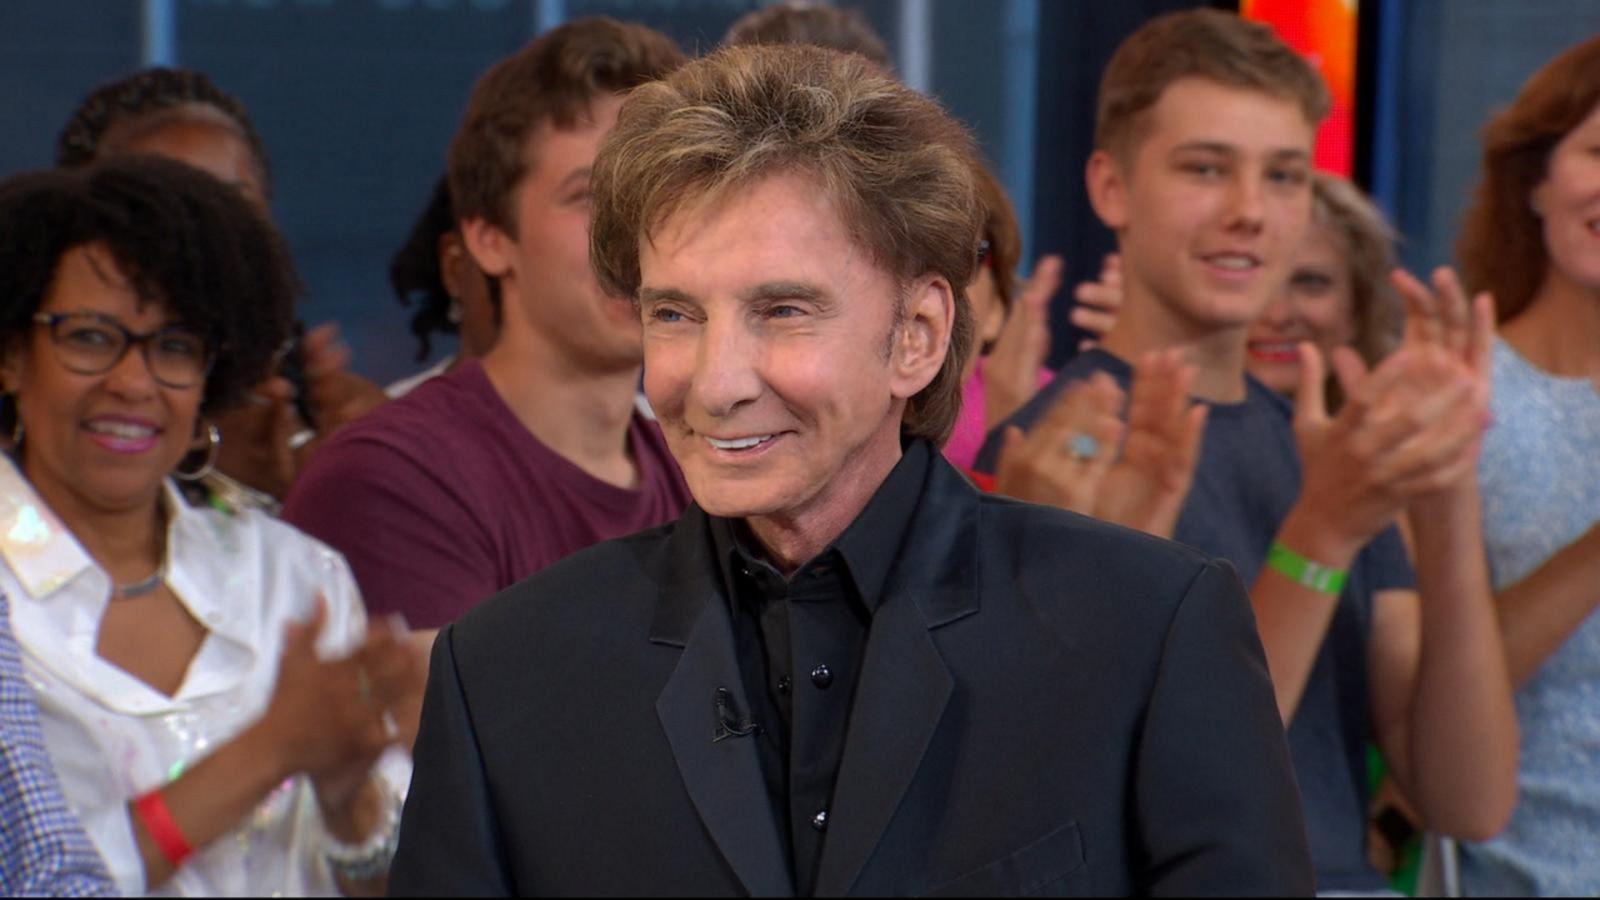 Catching up with Barry Manilow, live on 'GMA'